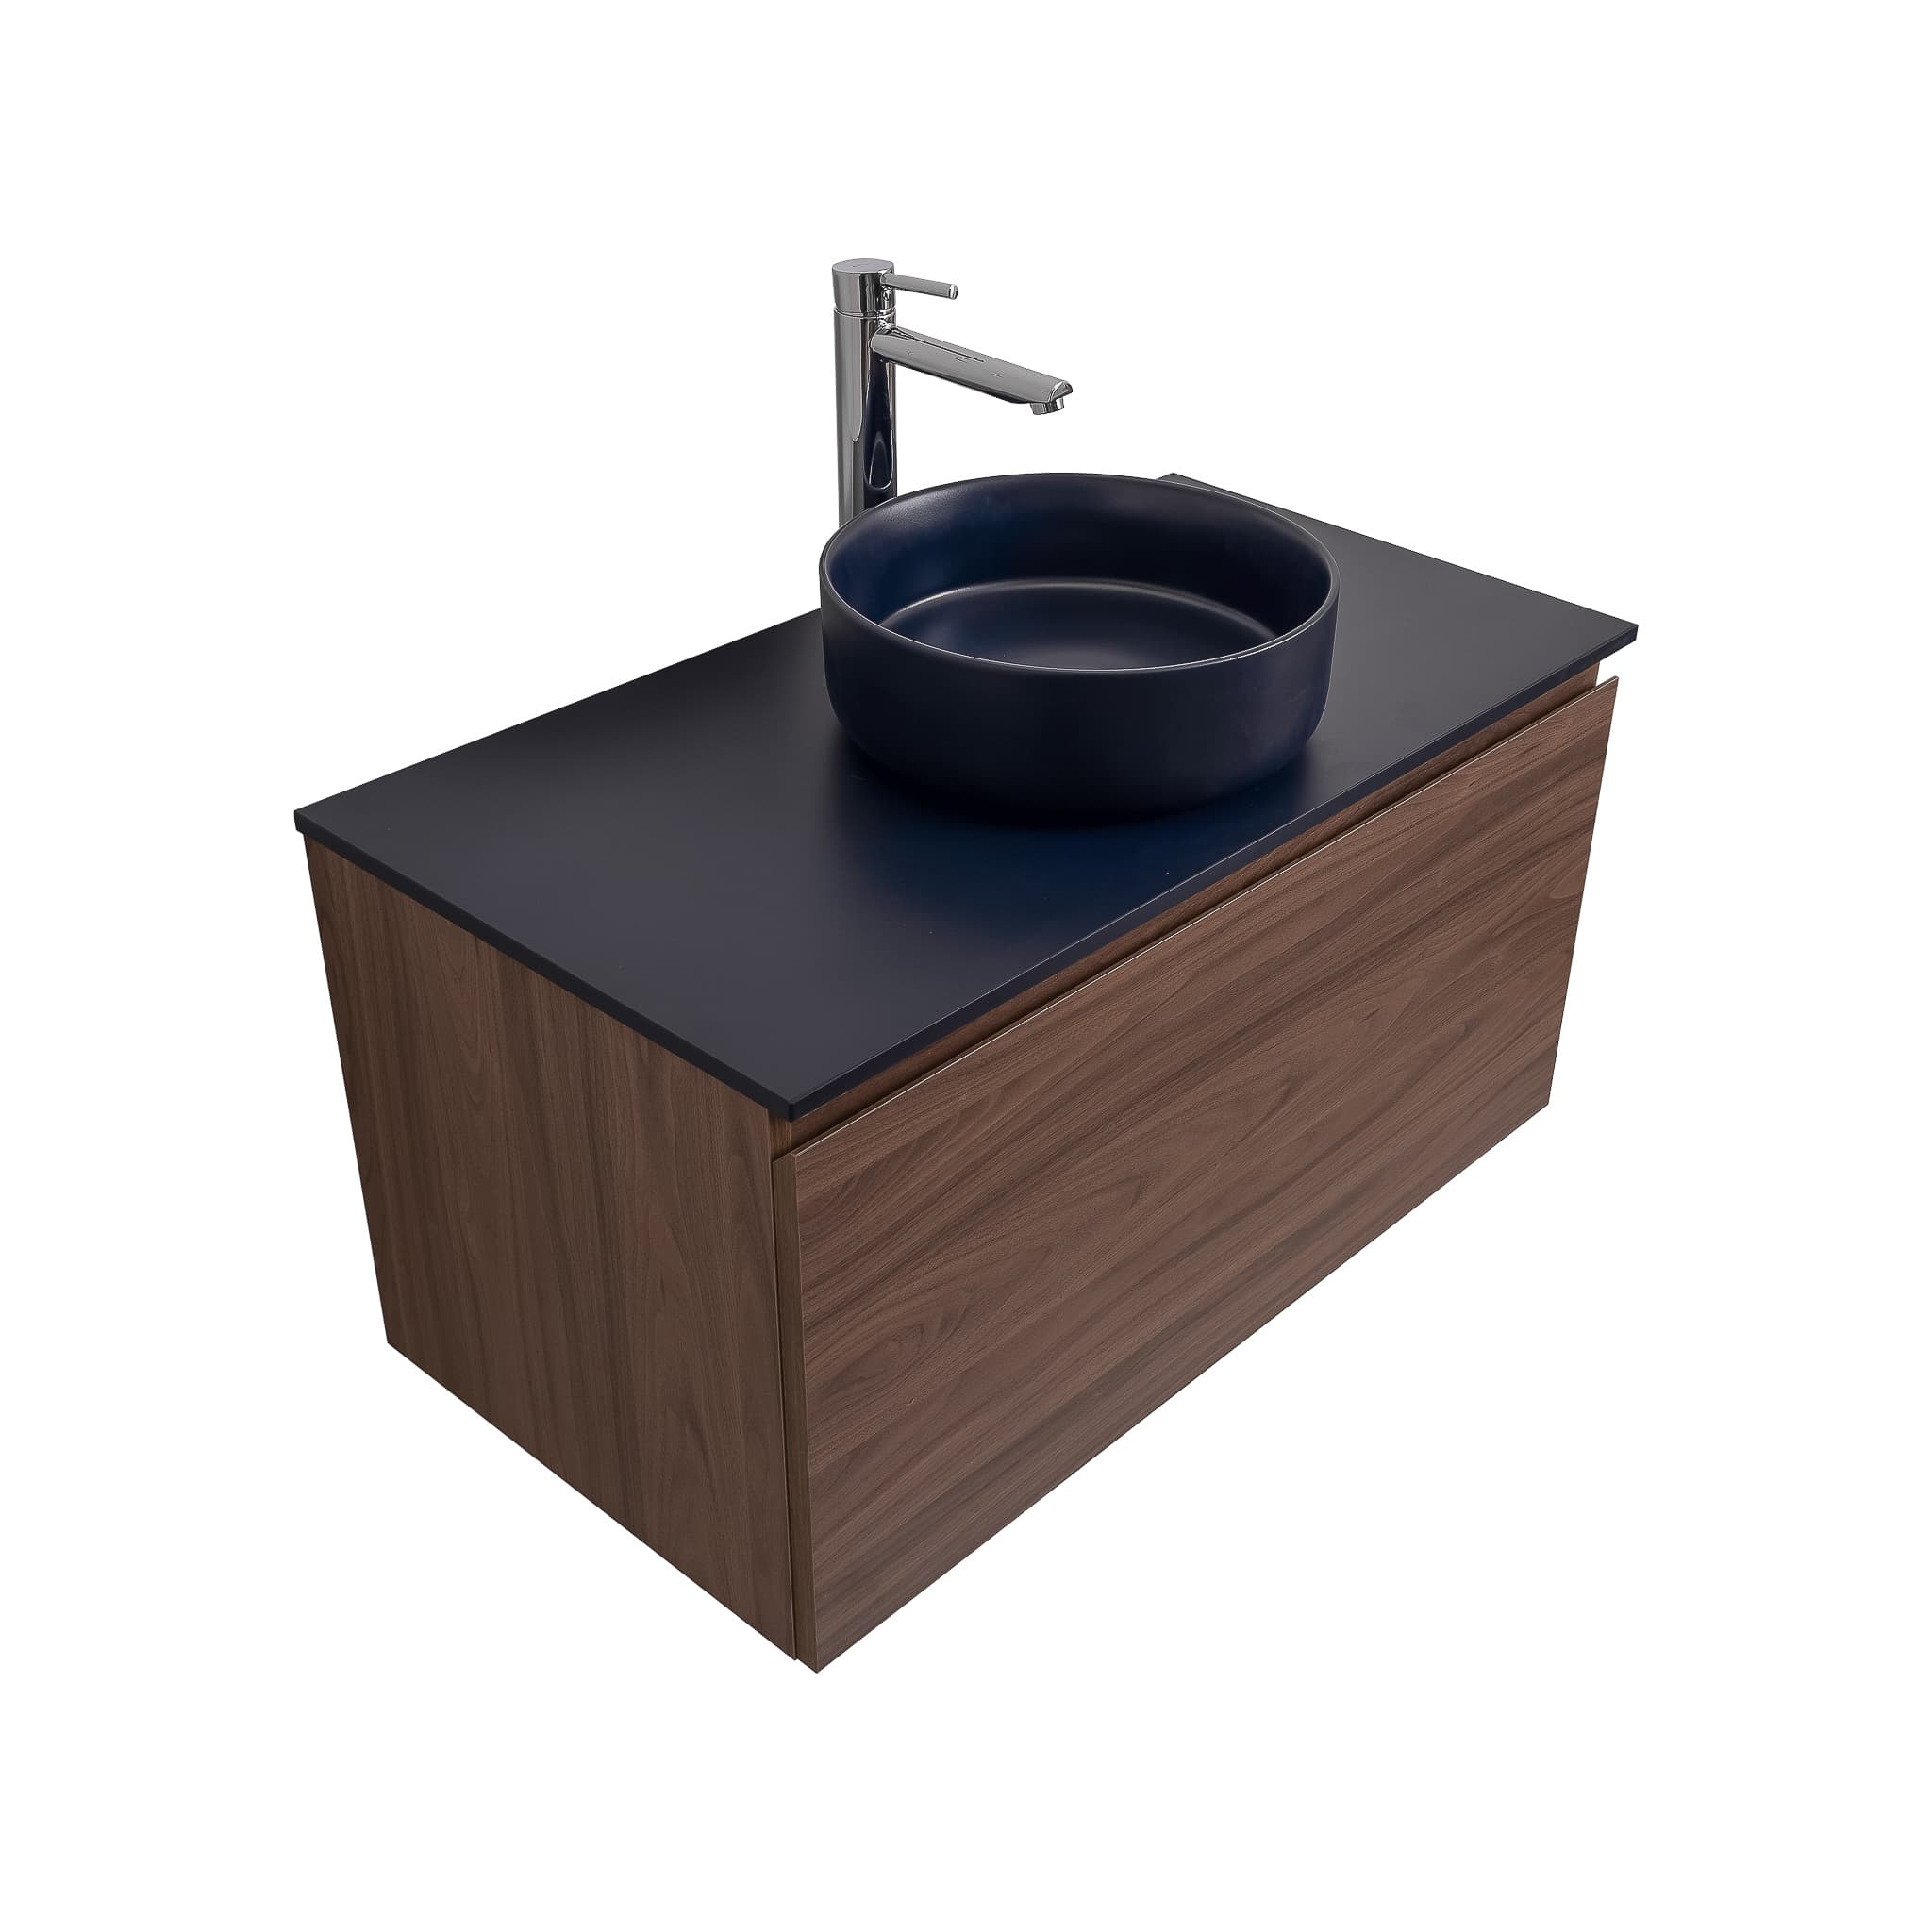 Venice 31.5 Walnut Wood Texture Cabinet, Ares Navy Blue Top And Ares Navy Blue Ceramic Basin, Wall Mounted Modern Vanity Set